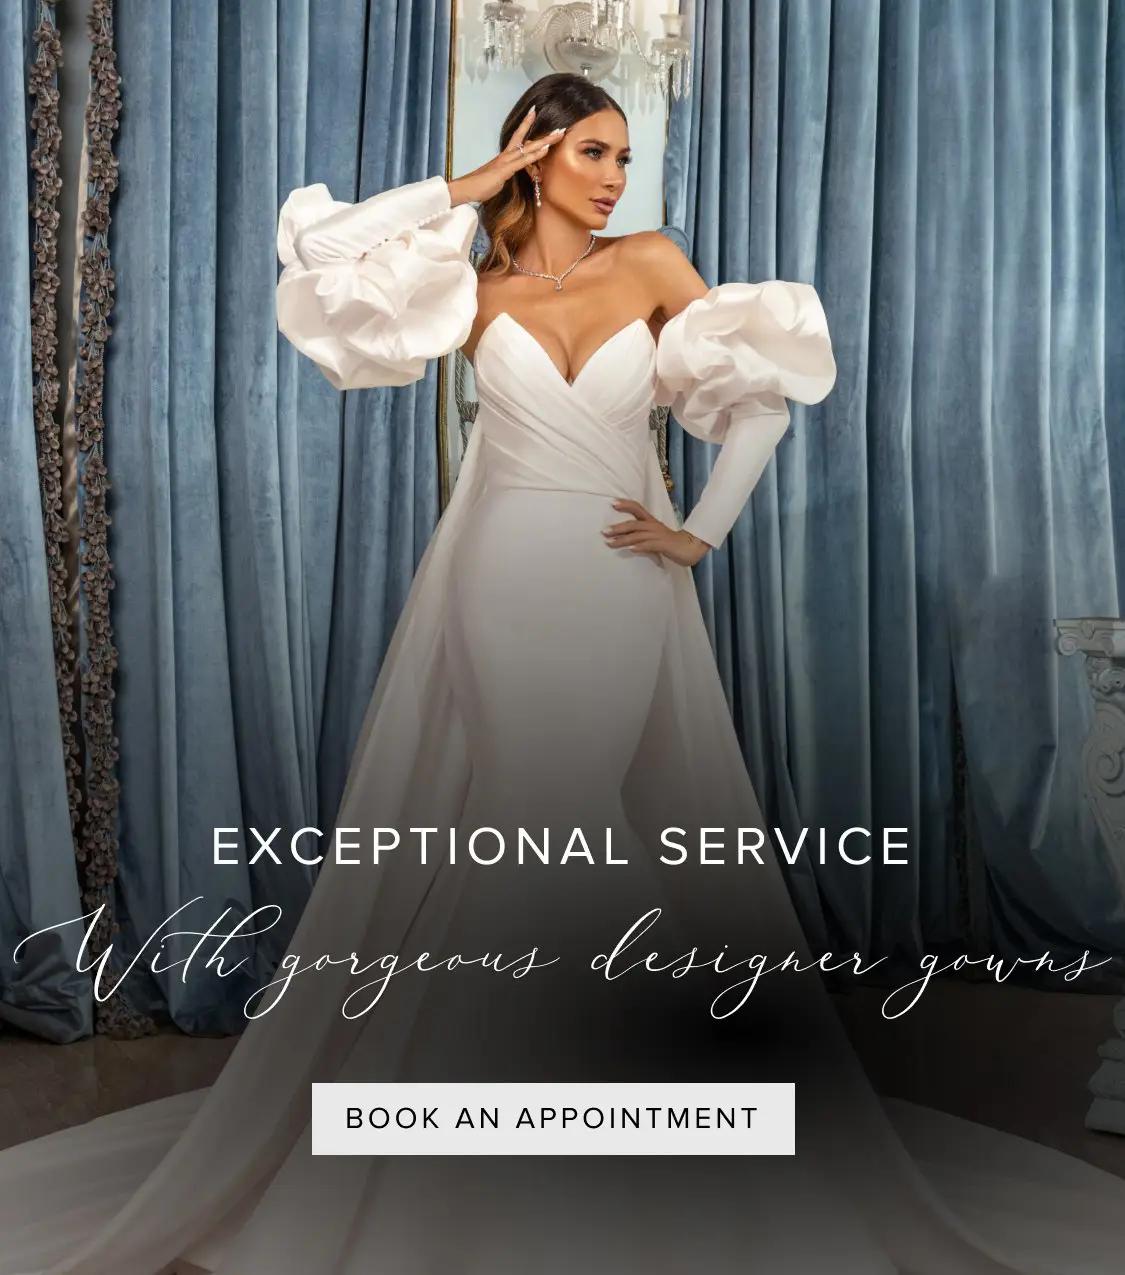 "Exceptional Service" banner for mobile